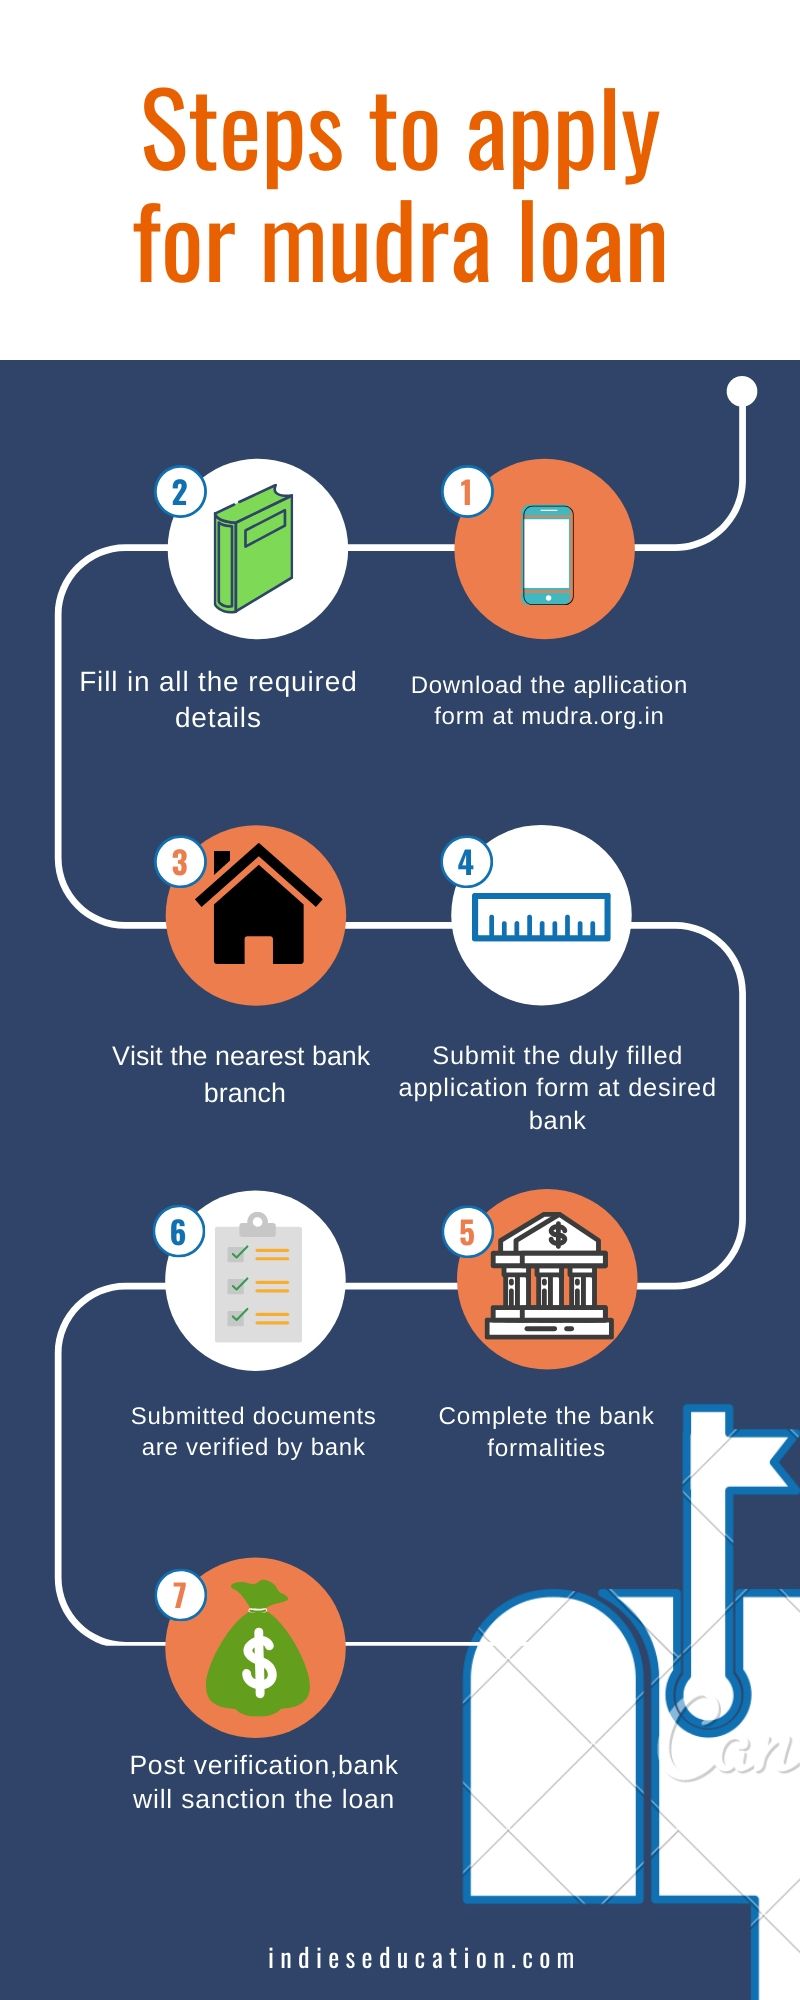 Steps to apply for mudra loan